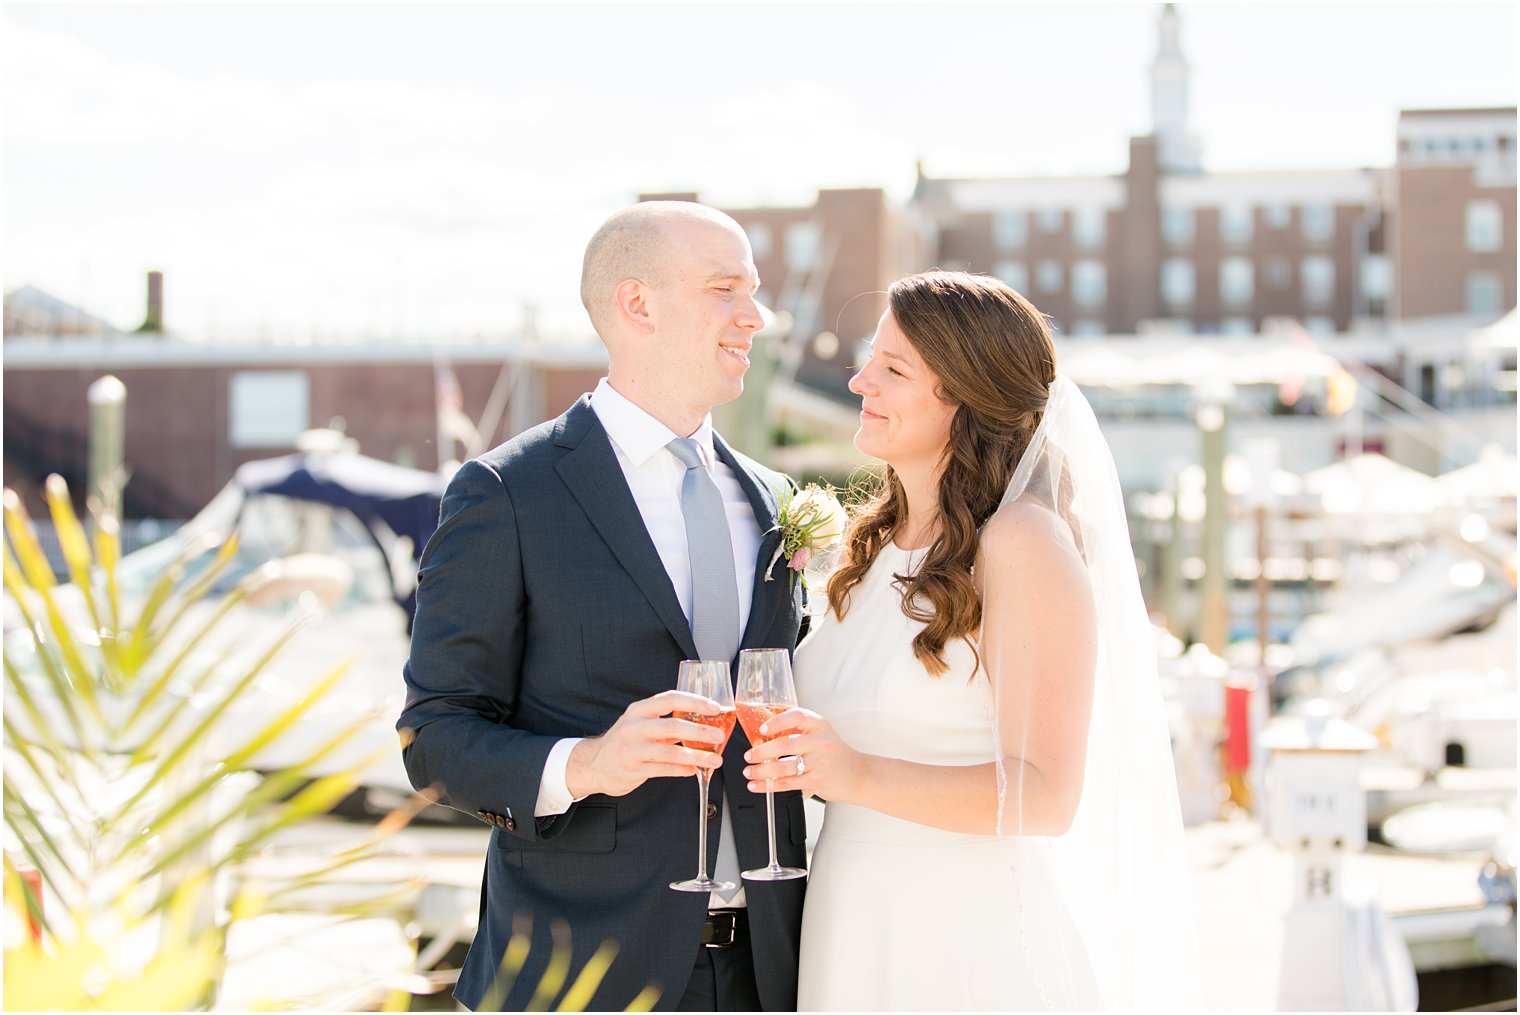 newlyweds toast with champagne on wedding day